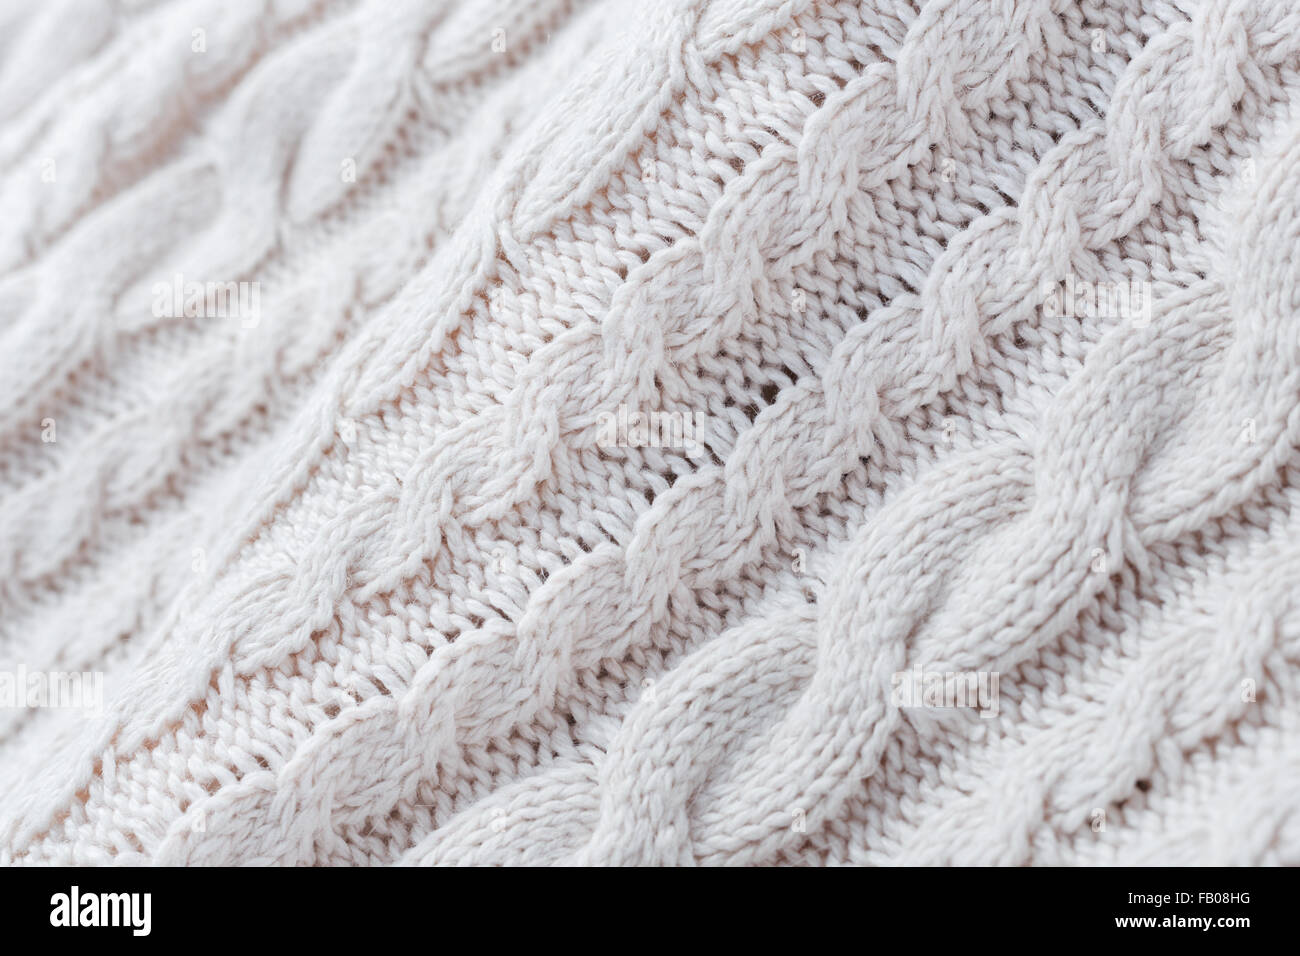 White Knit Fabric Texture And Background Stock Photo Royalty Free